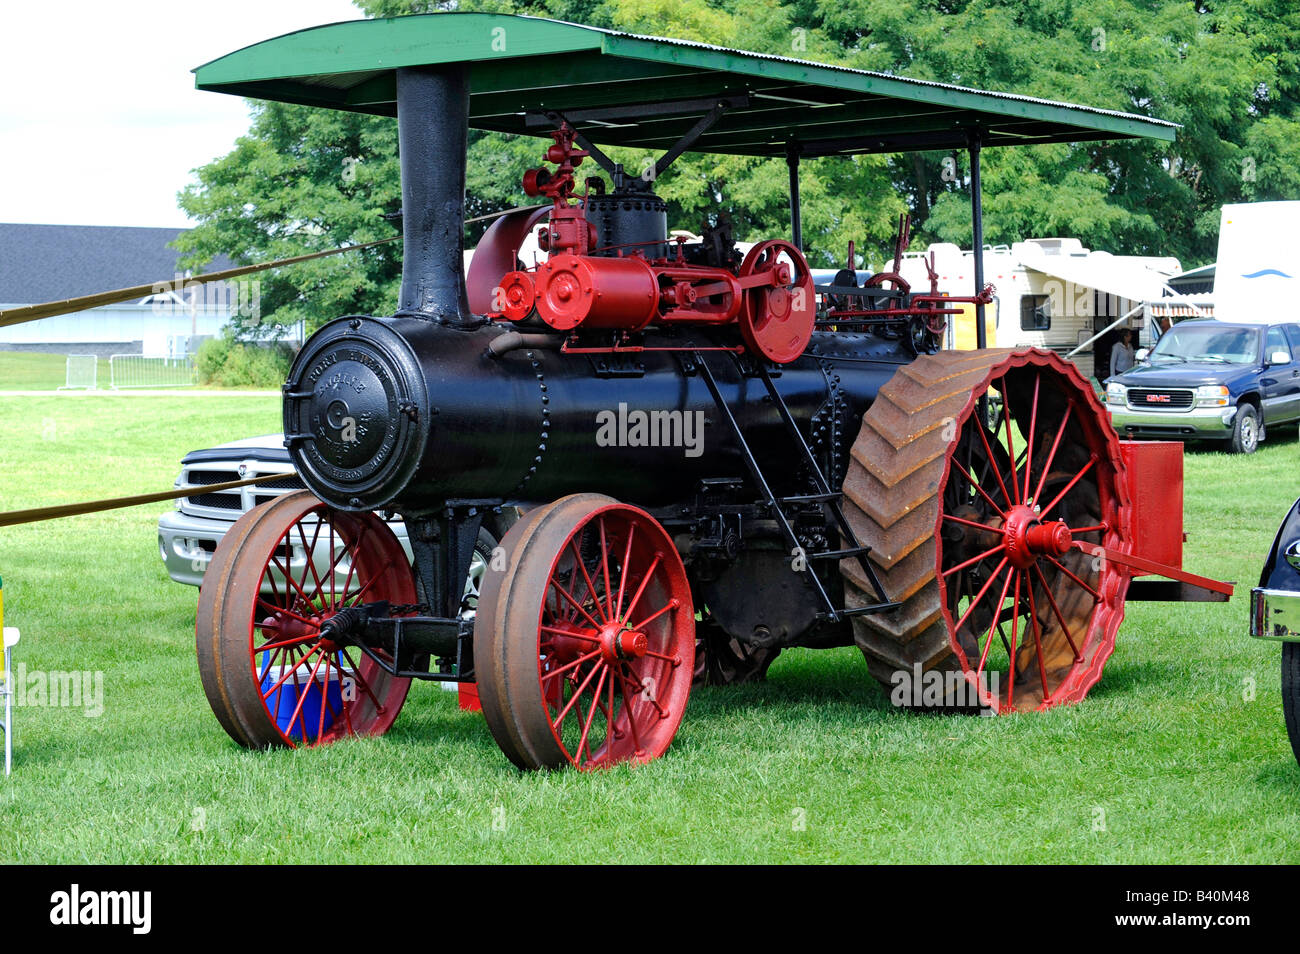 Circa 1920 steam powered farm tractor Steam Traction Engine manufactured by the Keck Gonnerman Company Mount Vernon Indiana Stock Photo